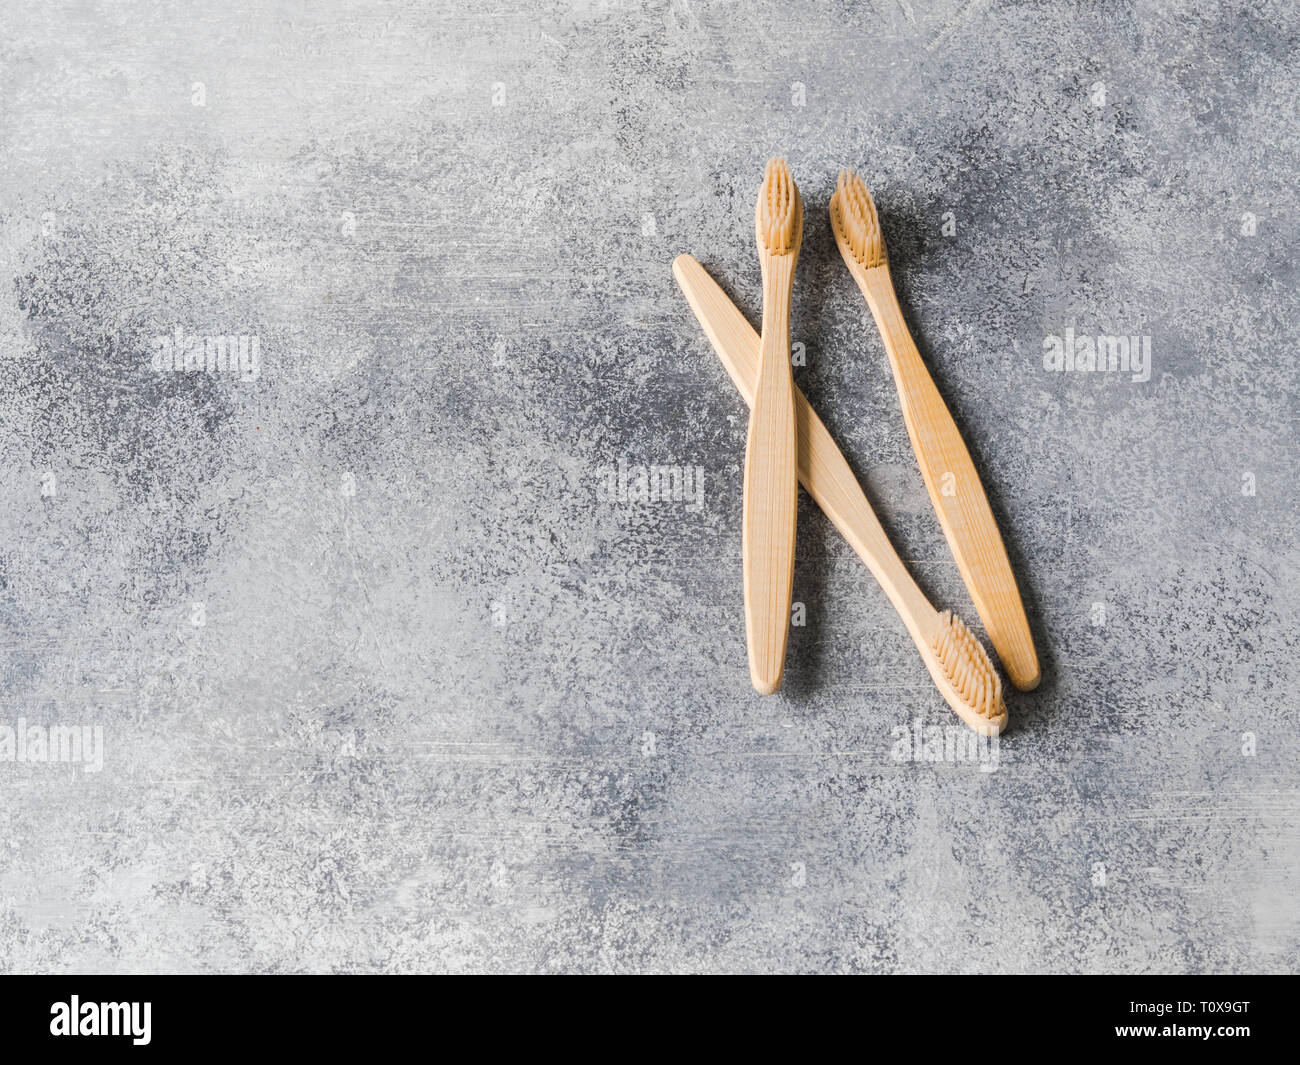 Three bamboo toothbrushes on grey background. Sustainable lifestyle zero waste concept. No plastic objects. copy space Stock Photo